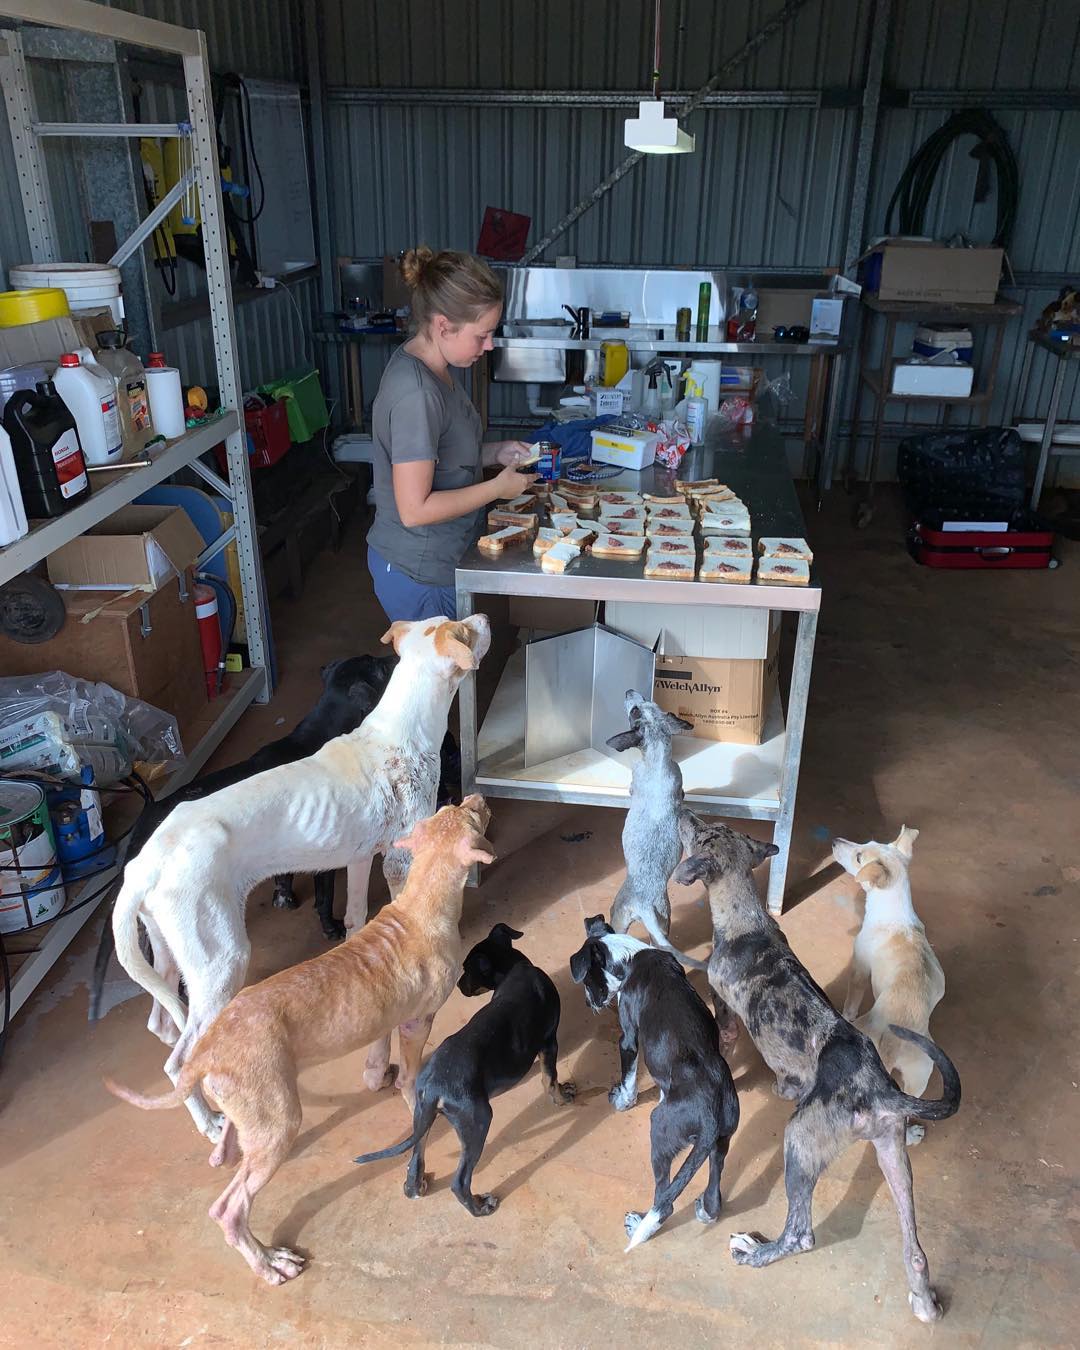 Seven thin camp dogs stand around a table where food is being prepared waiting to be fed